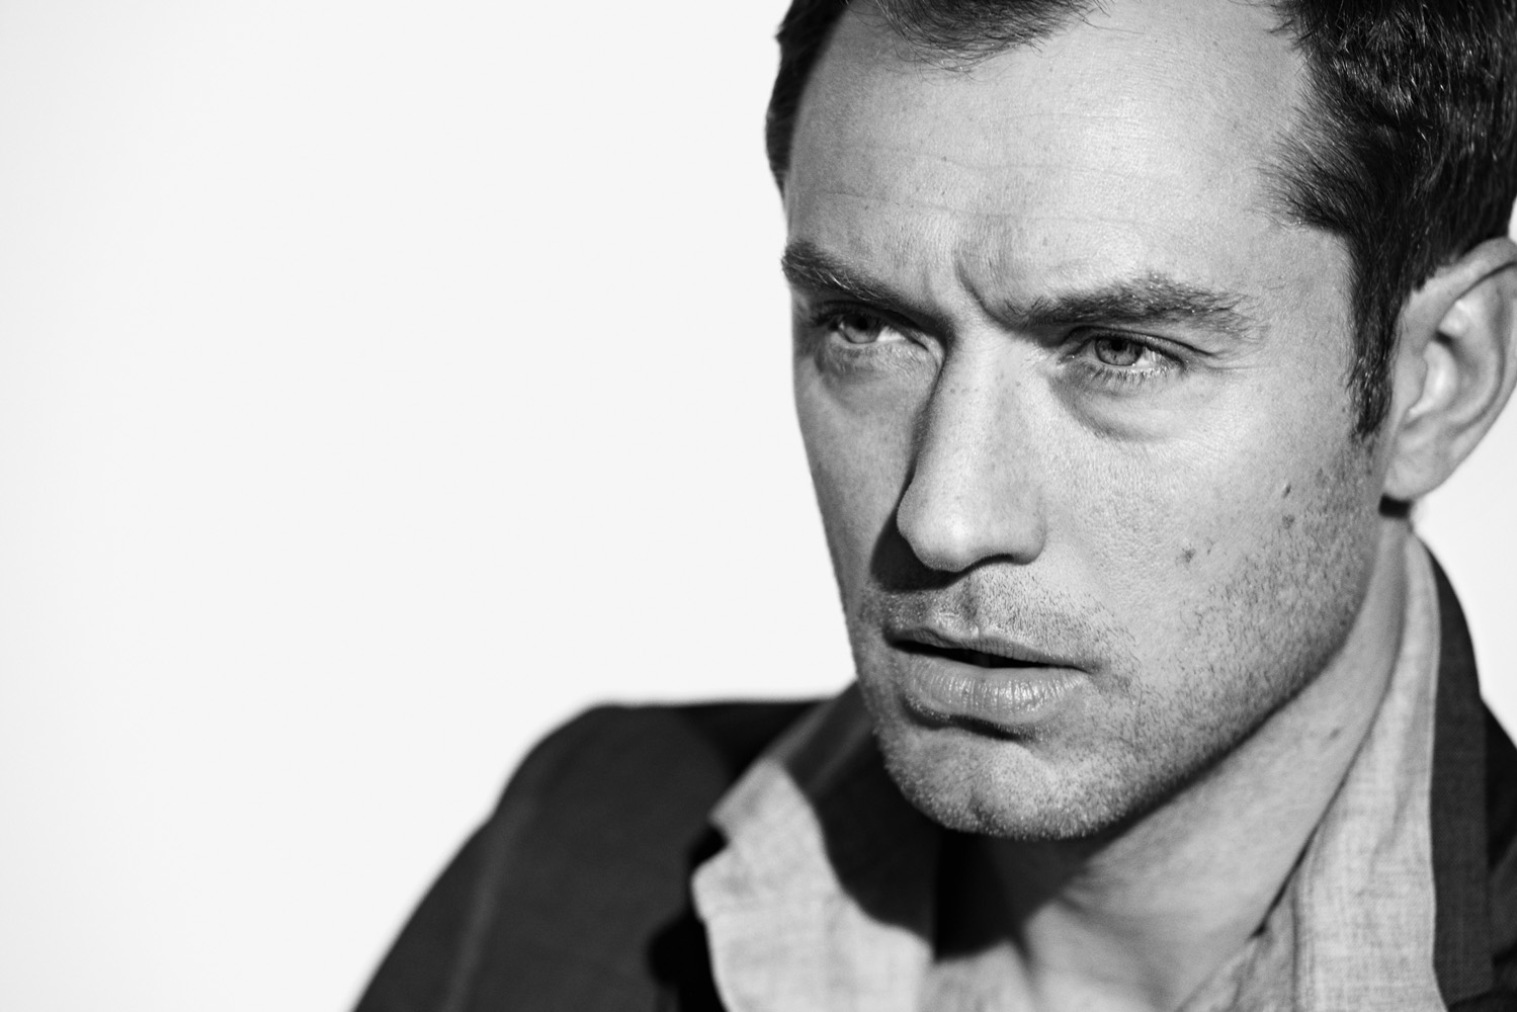 Jude Law Backgrounds, Compatible - PC, Mobile, Gadgets| 1517x1012 px